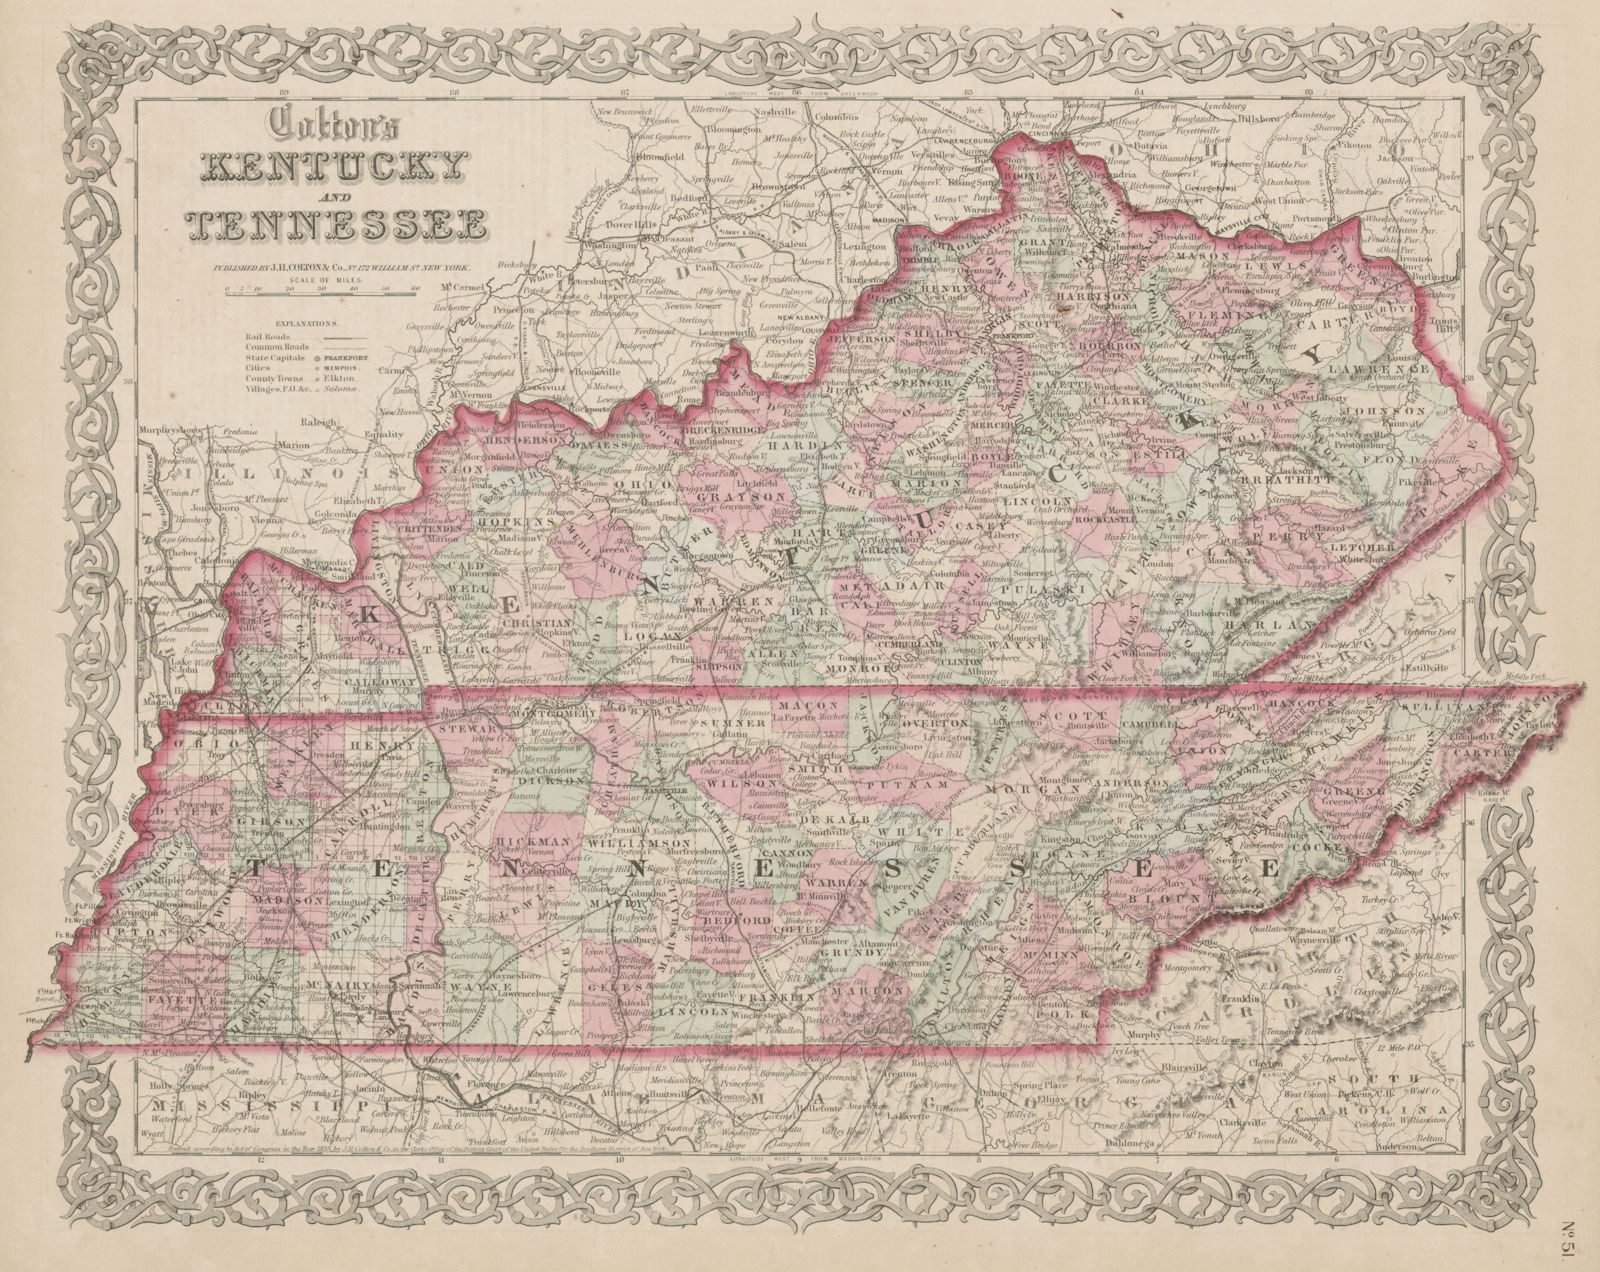 "Colton's Kentucky and Tennessee". Decorative antique US state map 1863